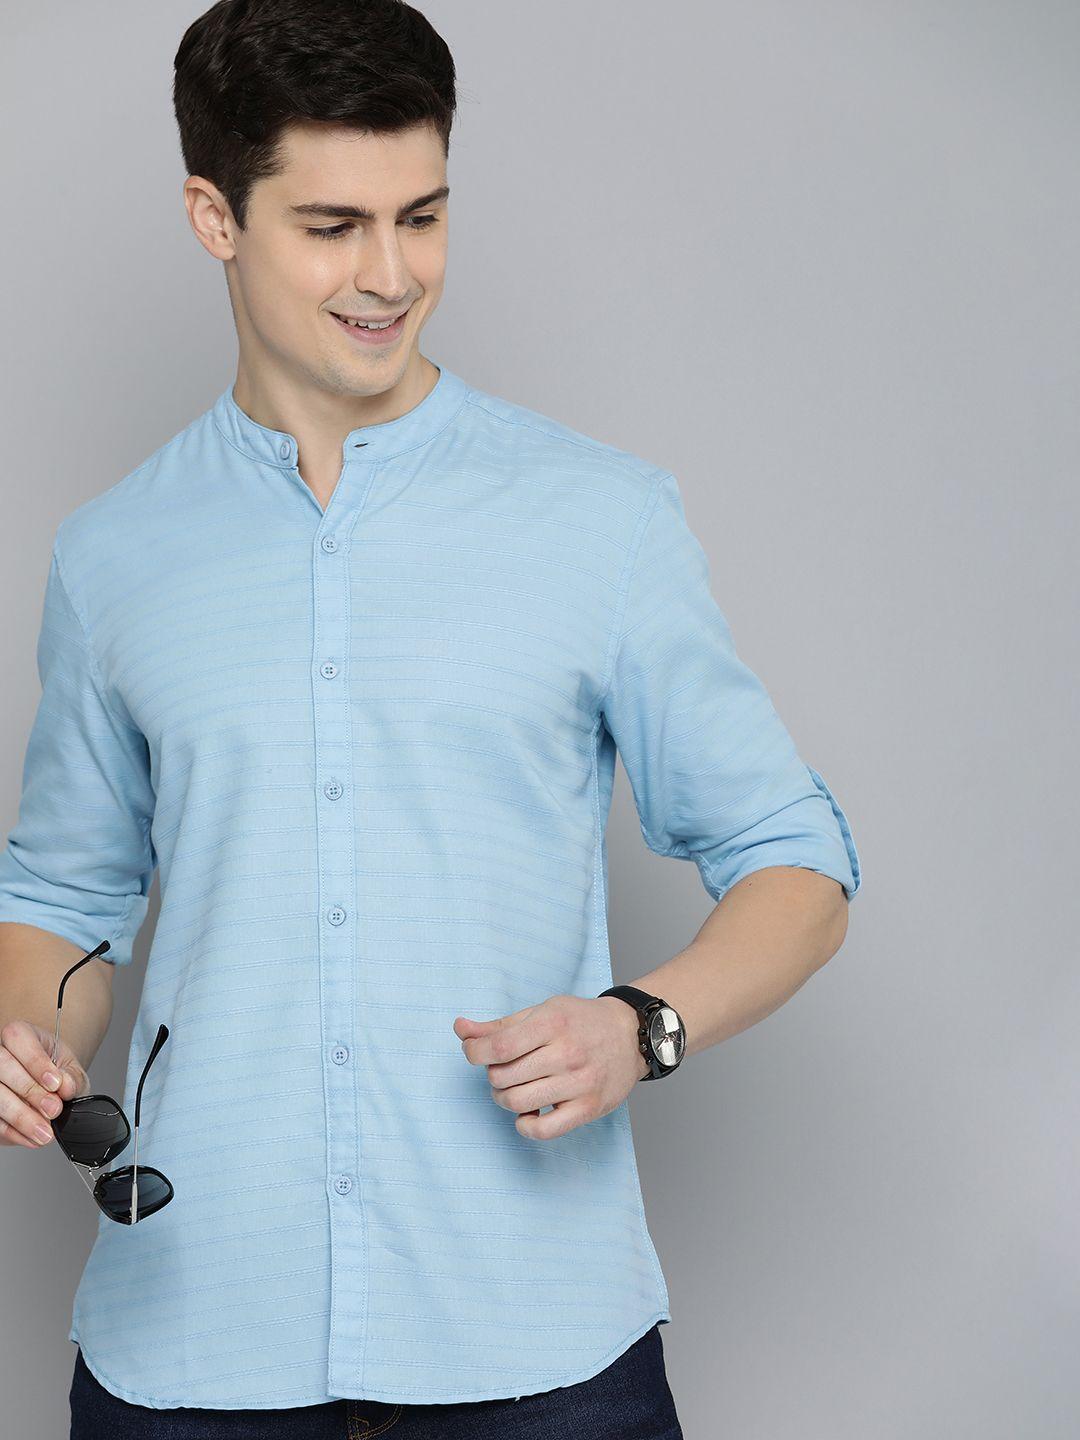 here&now-slim-fit-self-striped-pure-cotton-casual-shirt